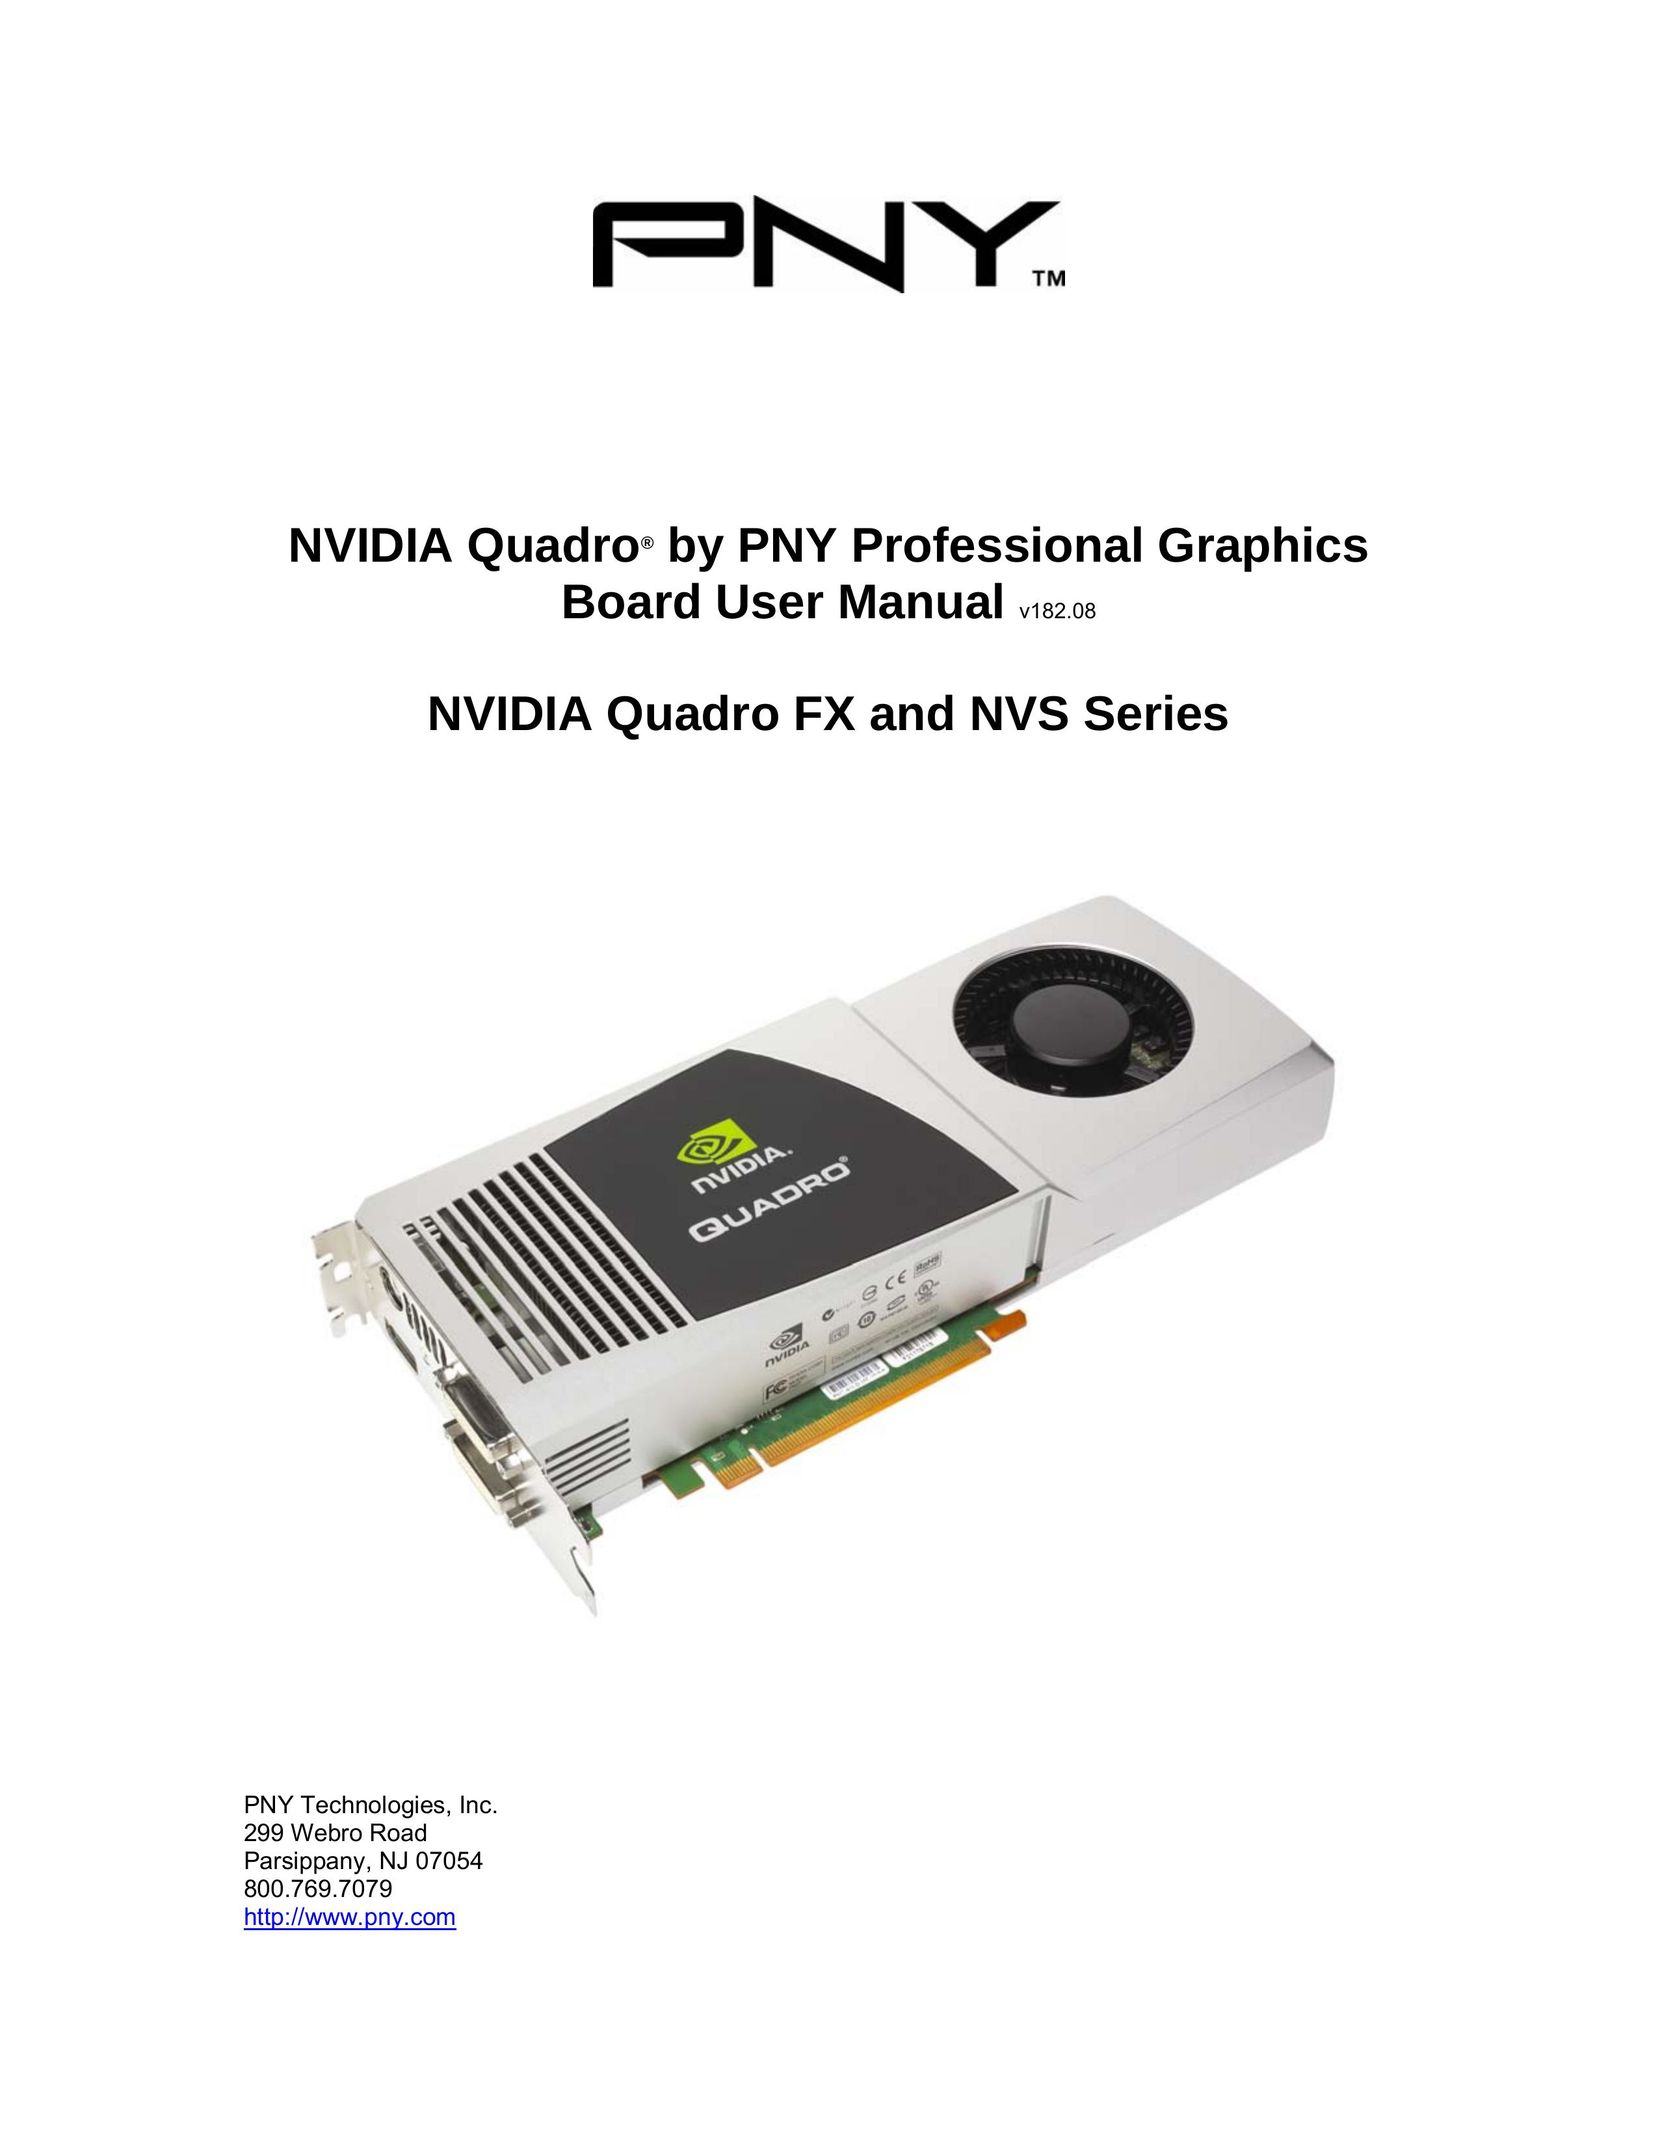 PNY FX 4700 X2G Computer Hardware User Manual